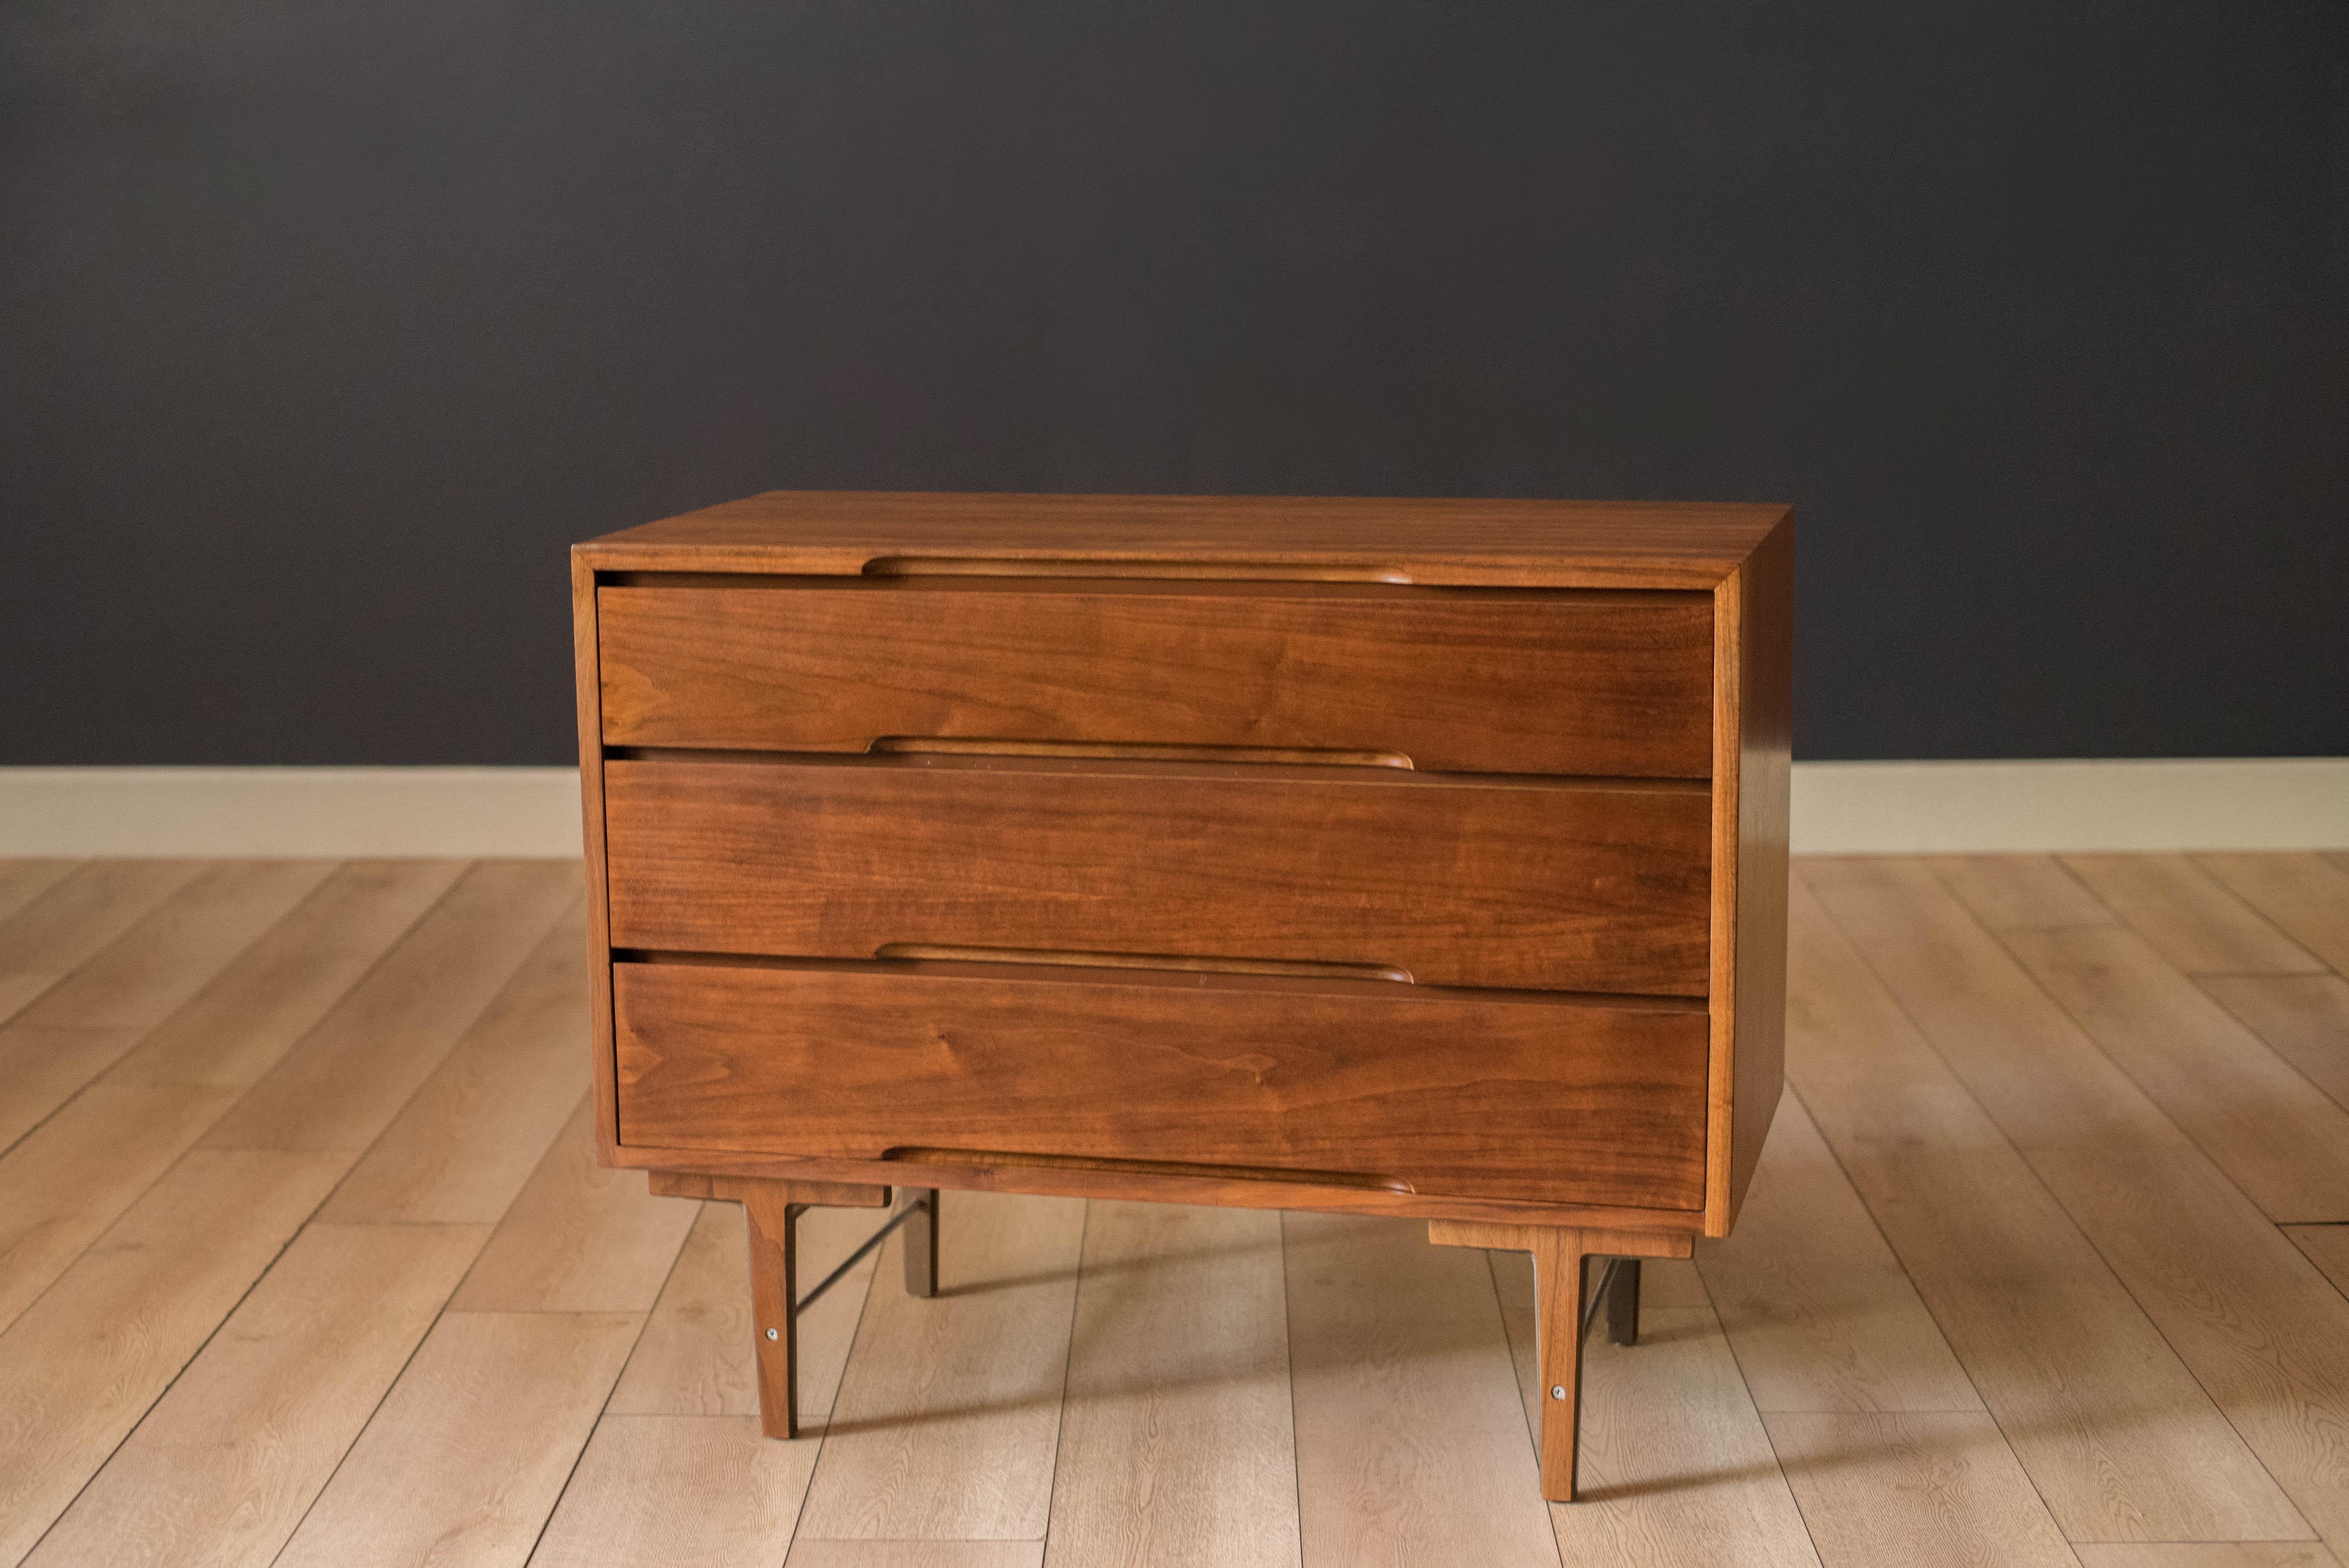 Mid century modern chest of drawers in walnut designed by Kipp Stewart for Glenn of California, circa 1950's. Features sculptural inset handles providing three storage drawers with dovetail construction. Supported by a unique base with two aluminum